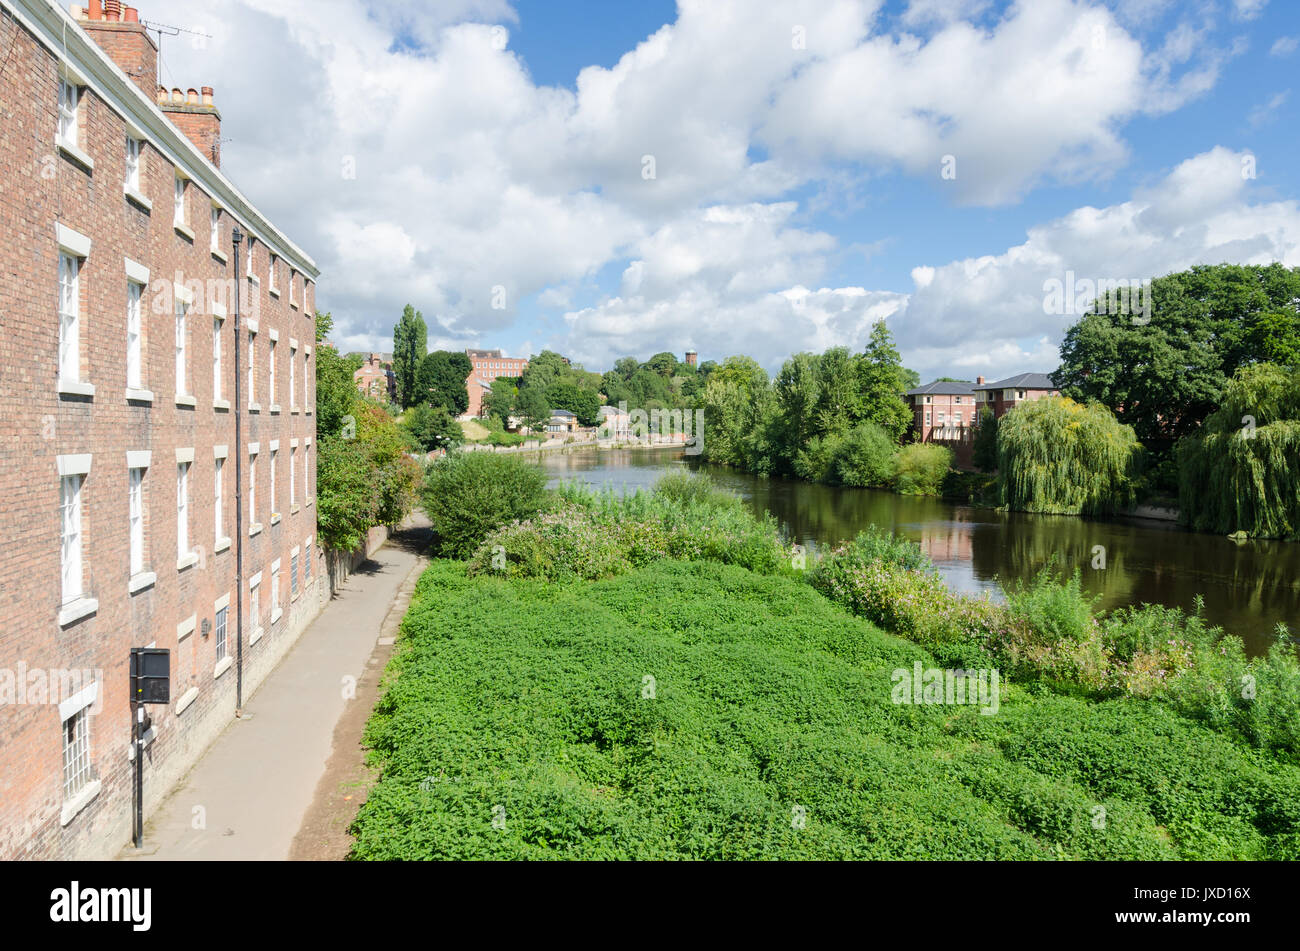 Overgrown banks of the River Severn in Shrewsbury viewed from the English Bridge Stock Photo